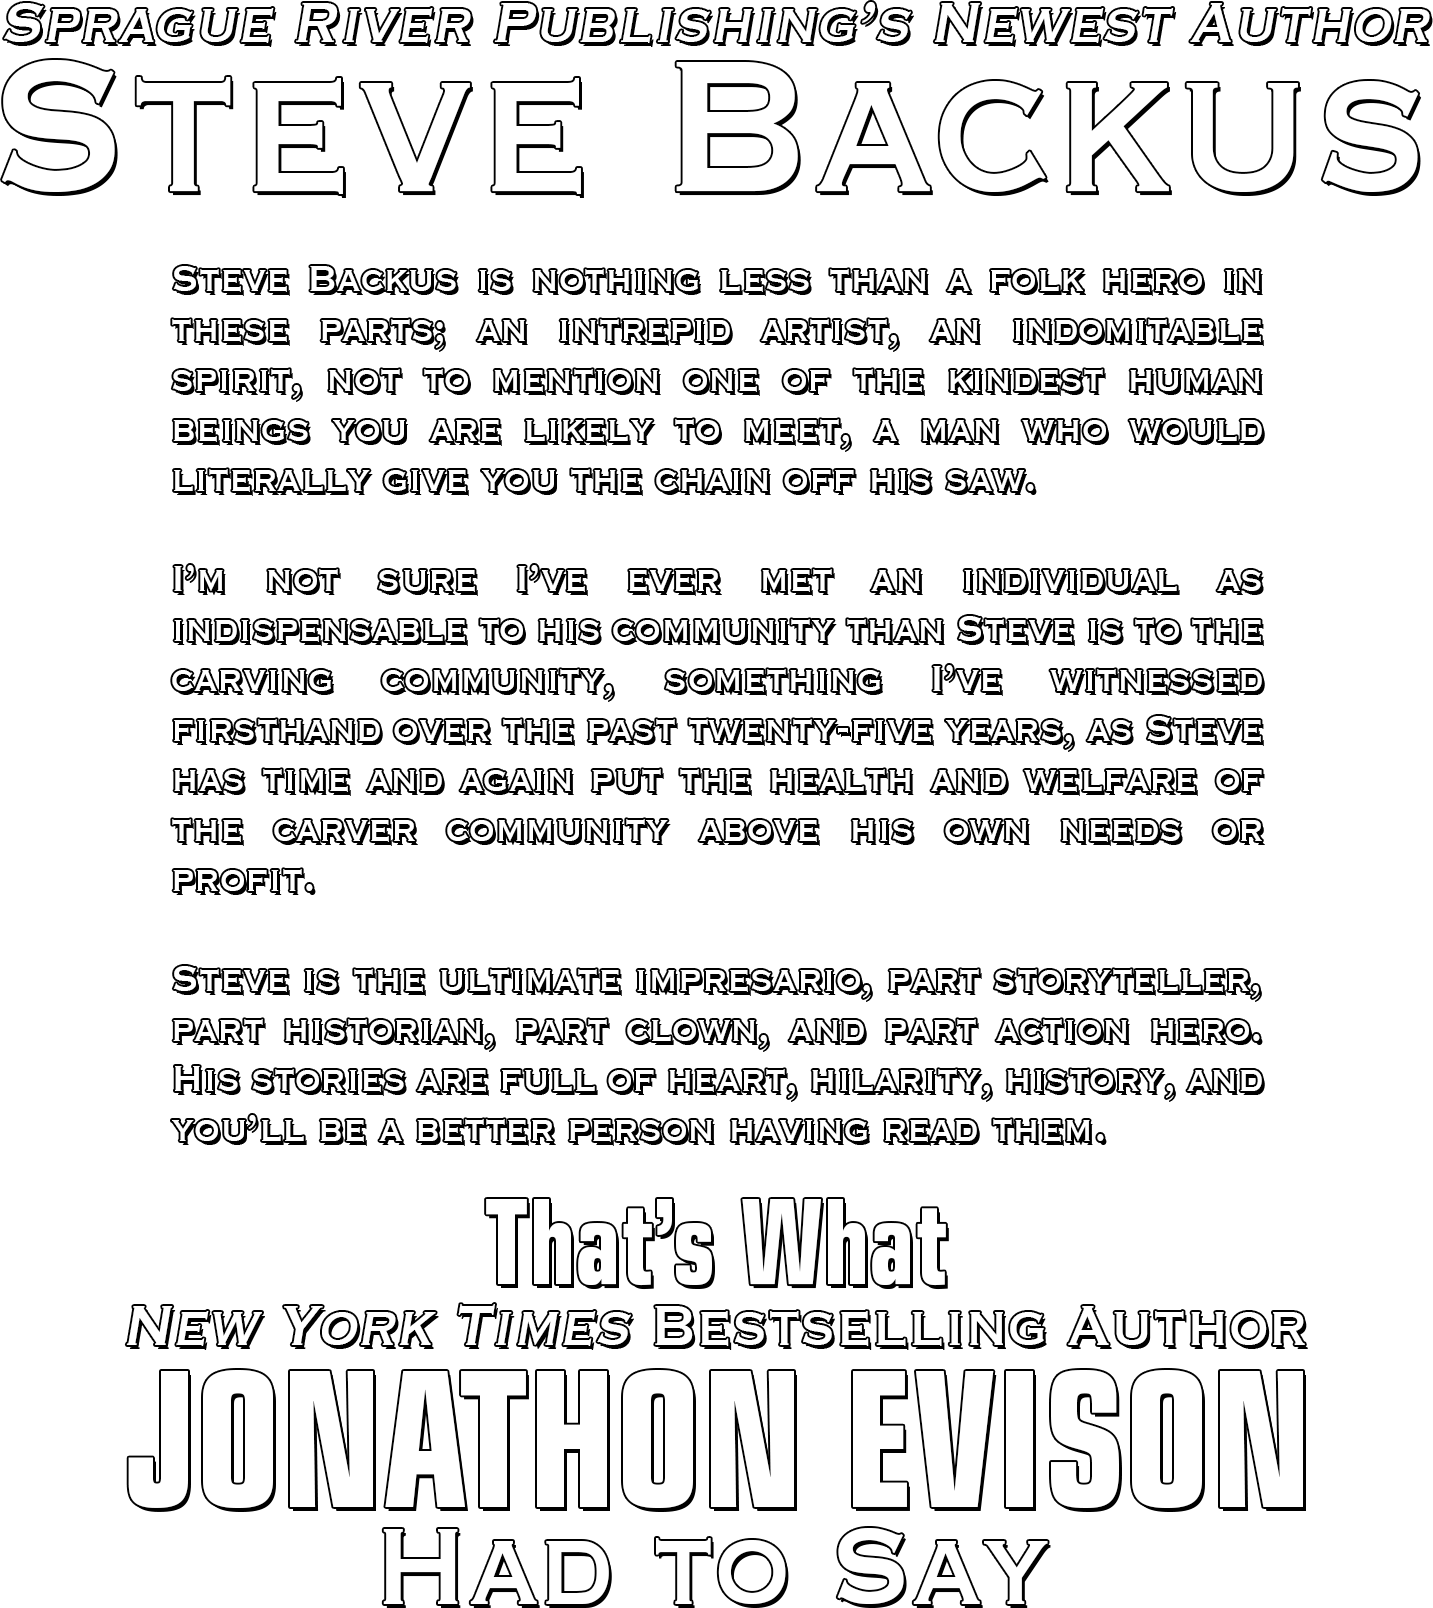 108-srp-steve-backus-featured-author-16950851176468.png